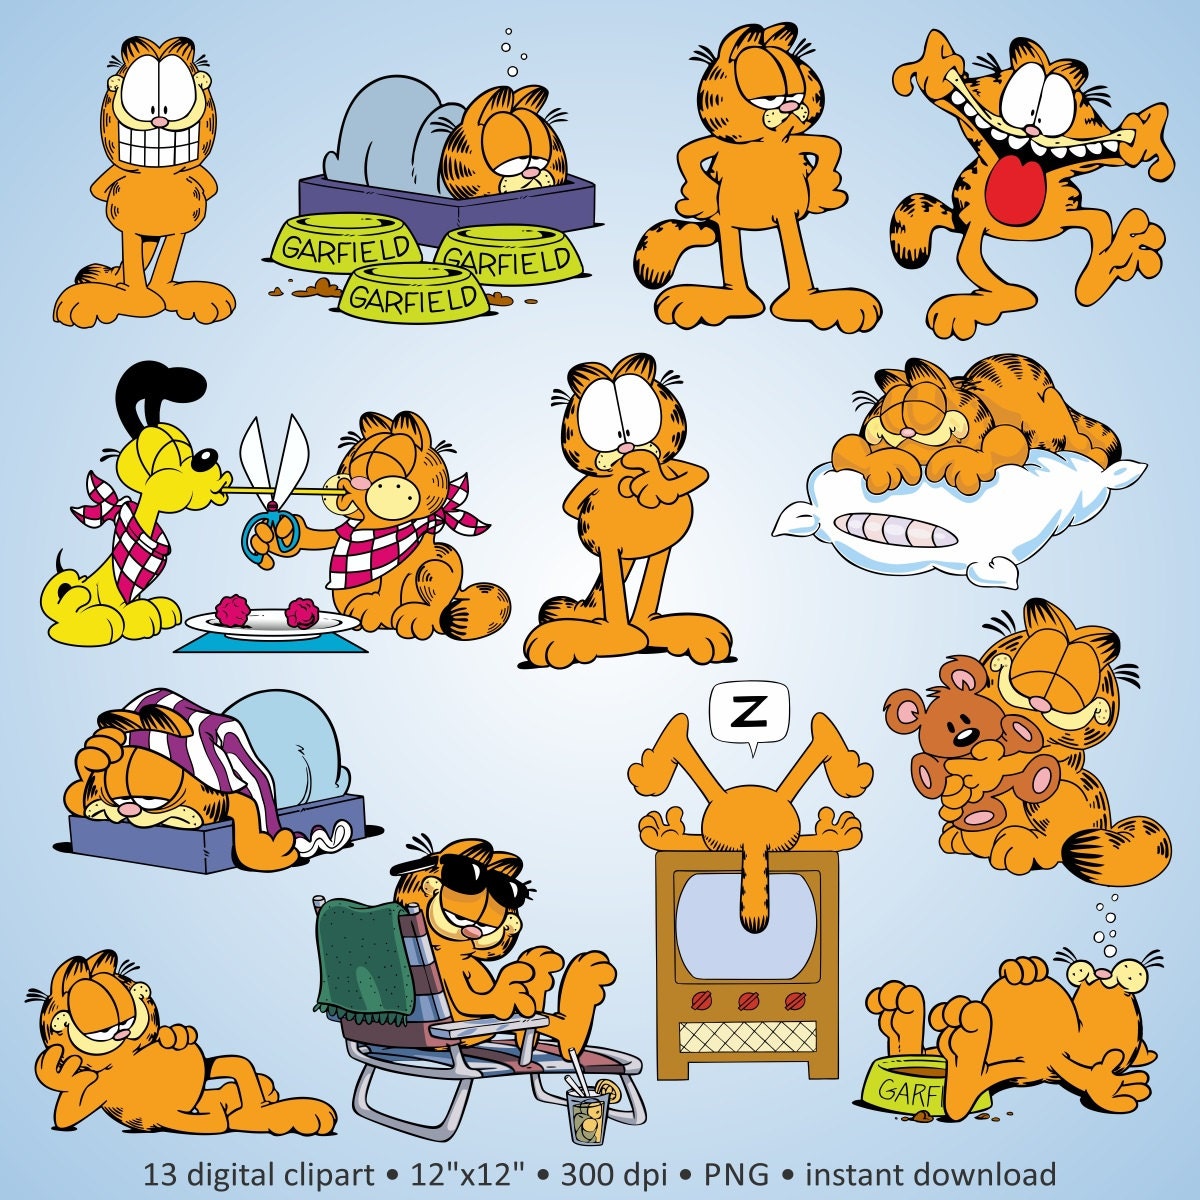 clipart of garfield the cat - photo #41